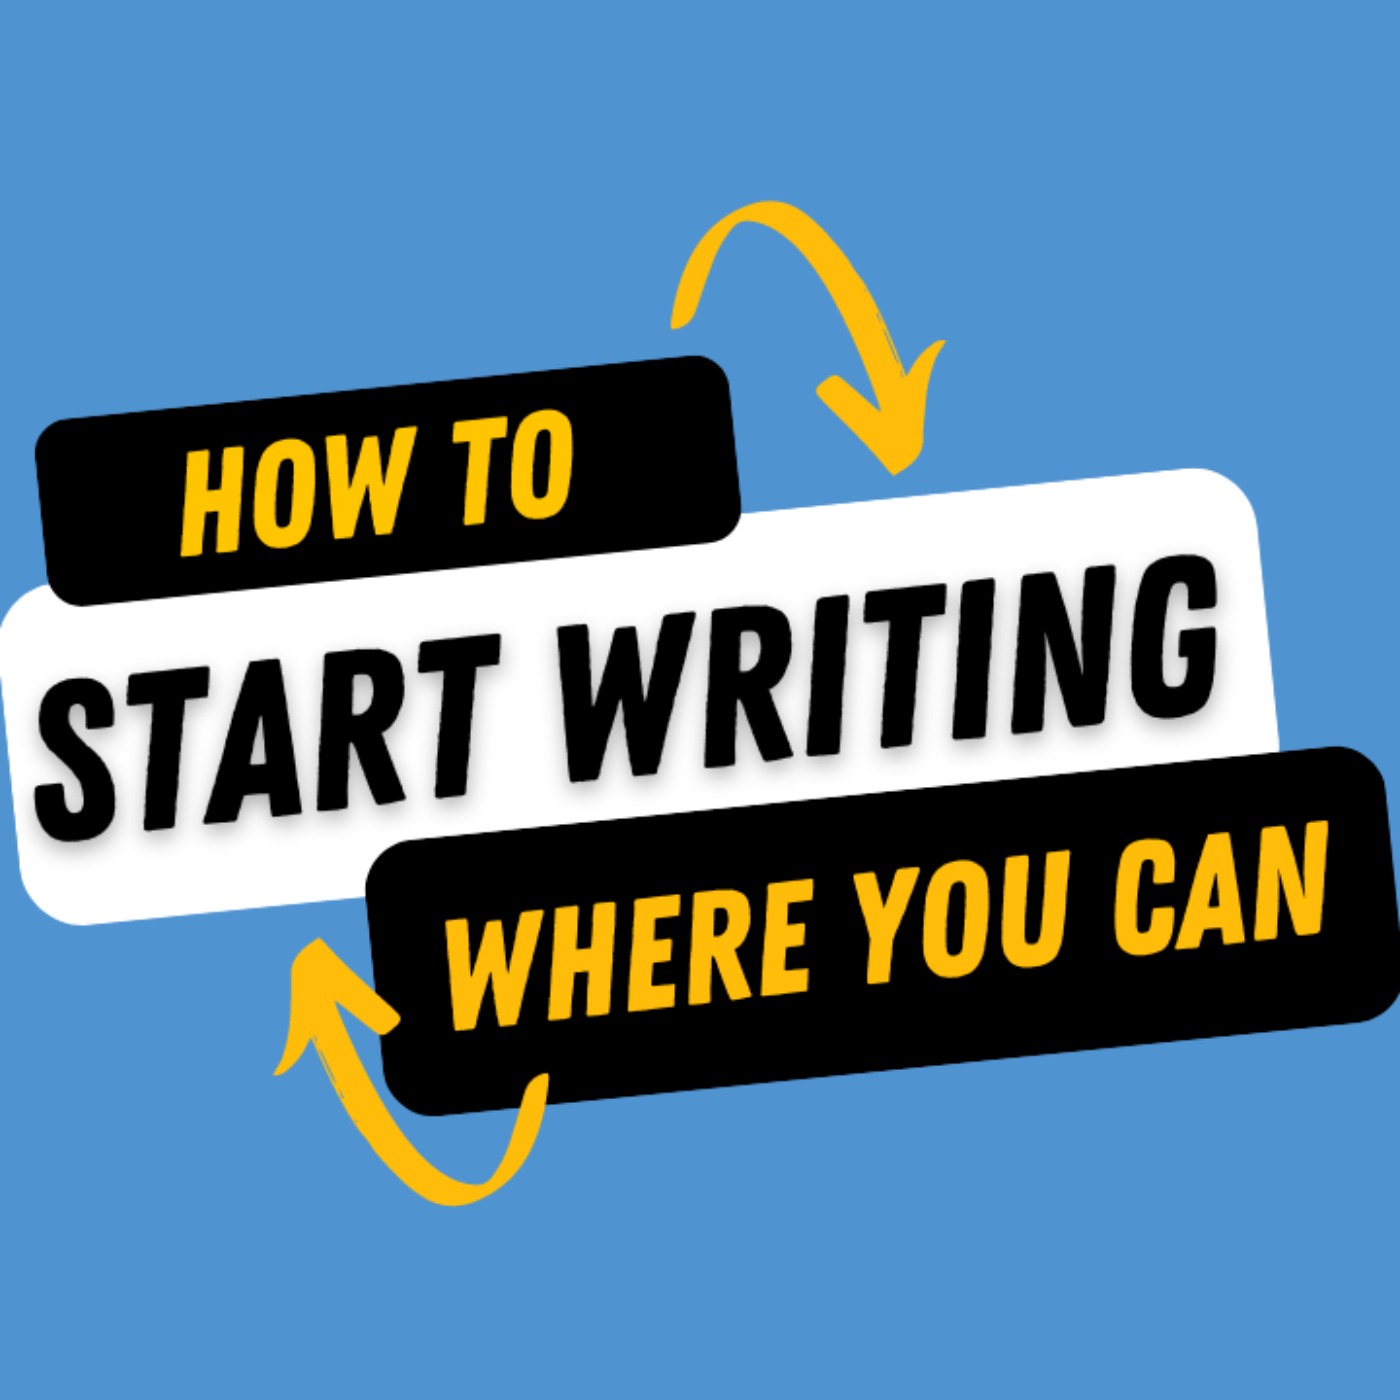 Ep. 342: Peggy Orenstein on How to Start Writing Where You Can